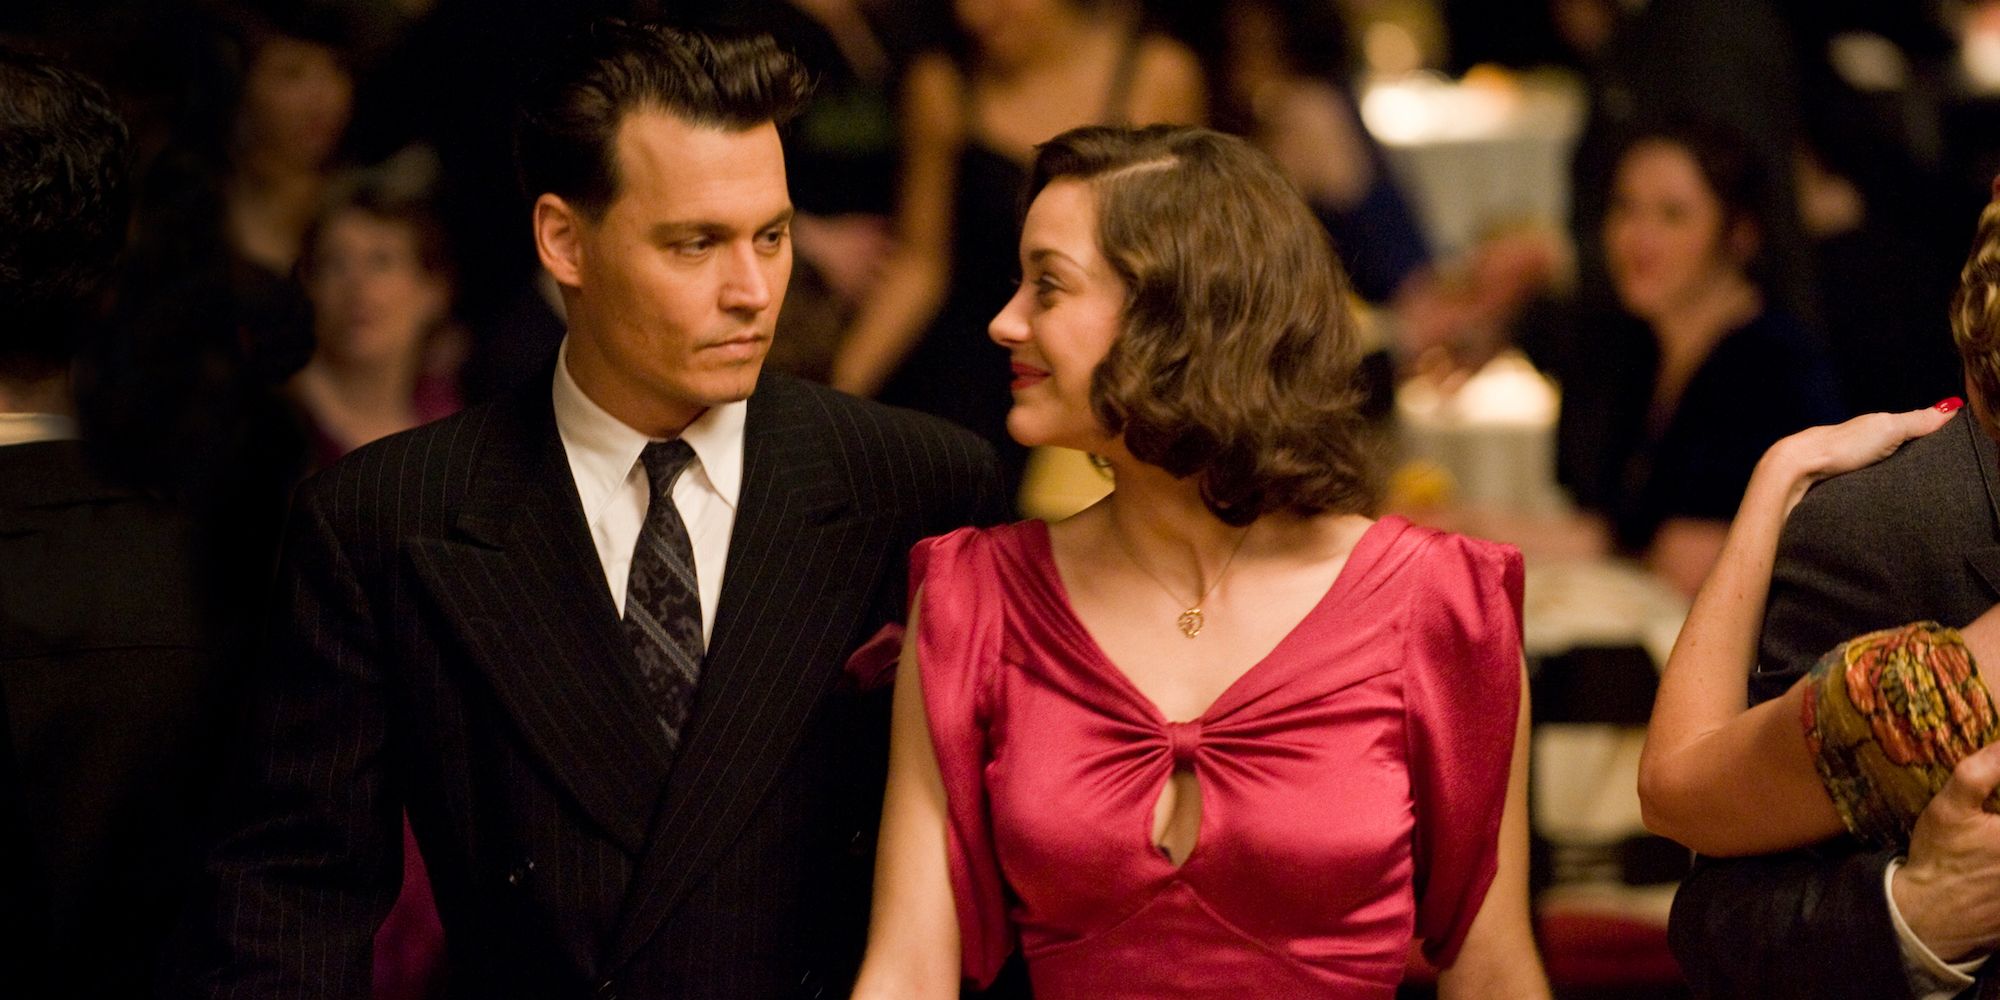 Johnny Depp and Marion Cotillard look at each other on the dance floor in Public Enemies 